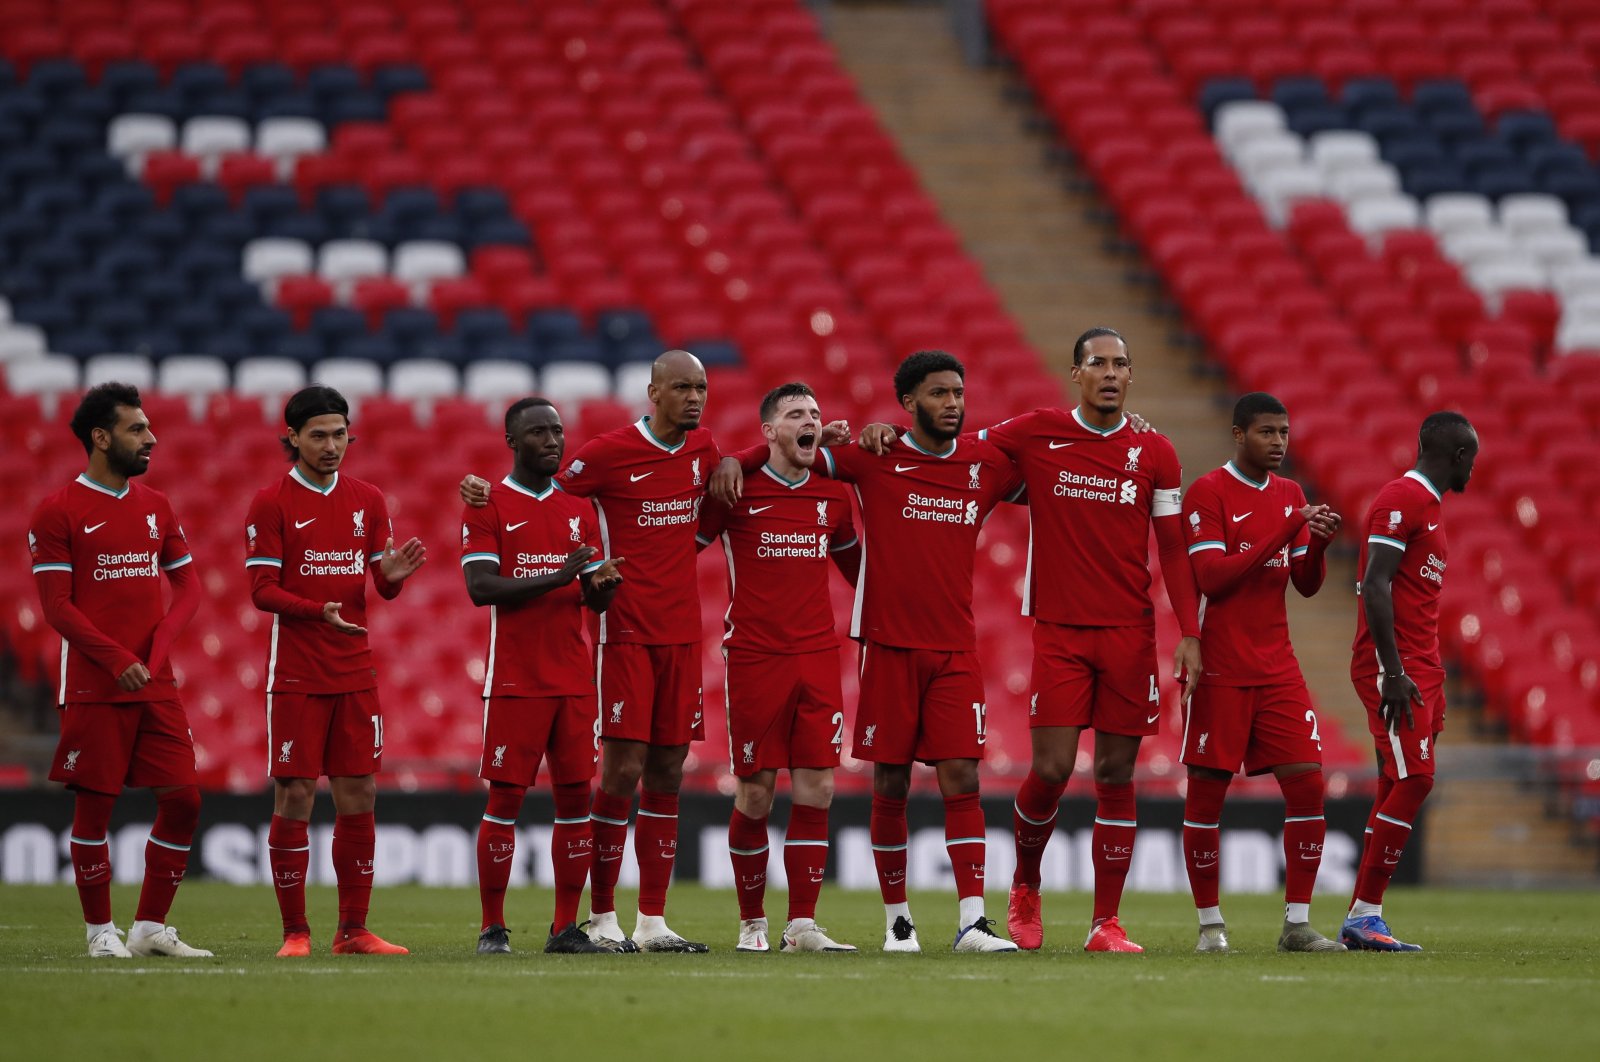 Liverpool players stand on the pitch during a match against Arsenal, in London, United Kingdom, Aug. 29, 2020. (AP Photo)